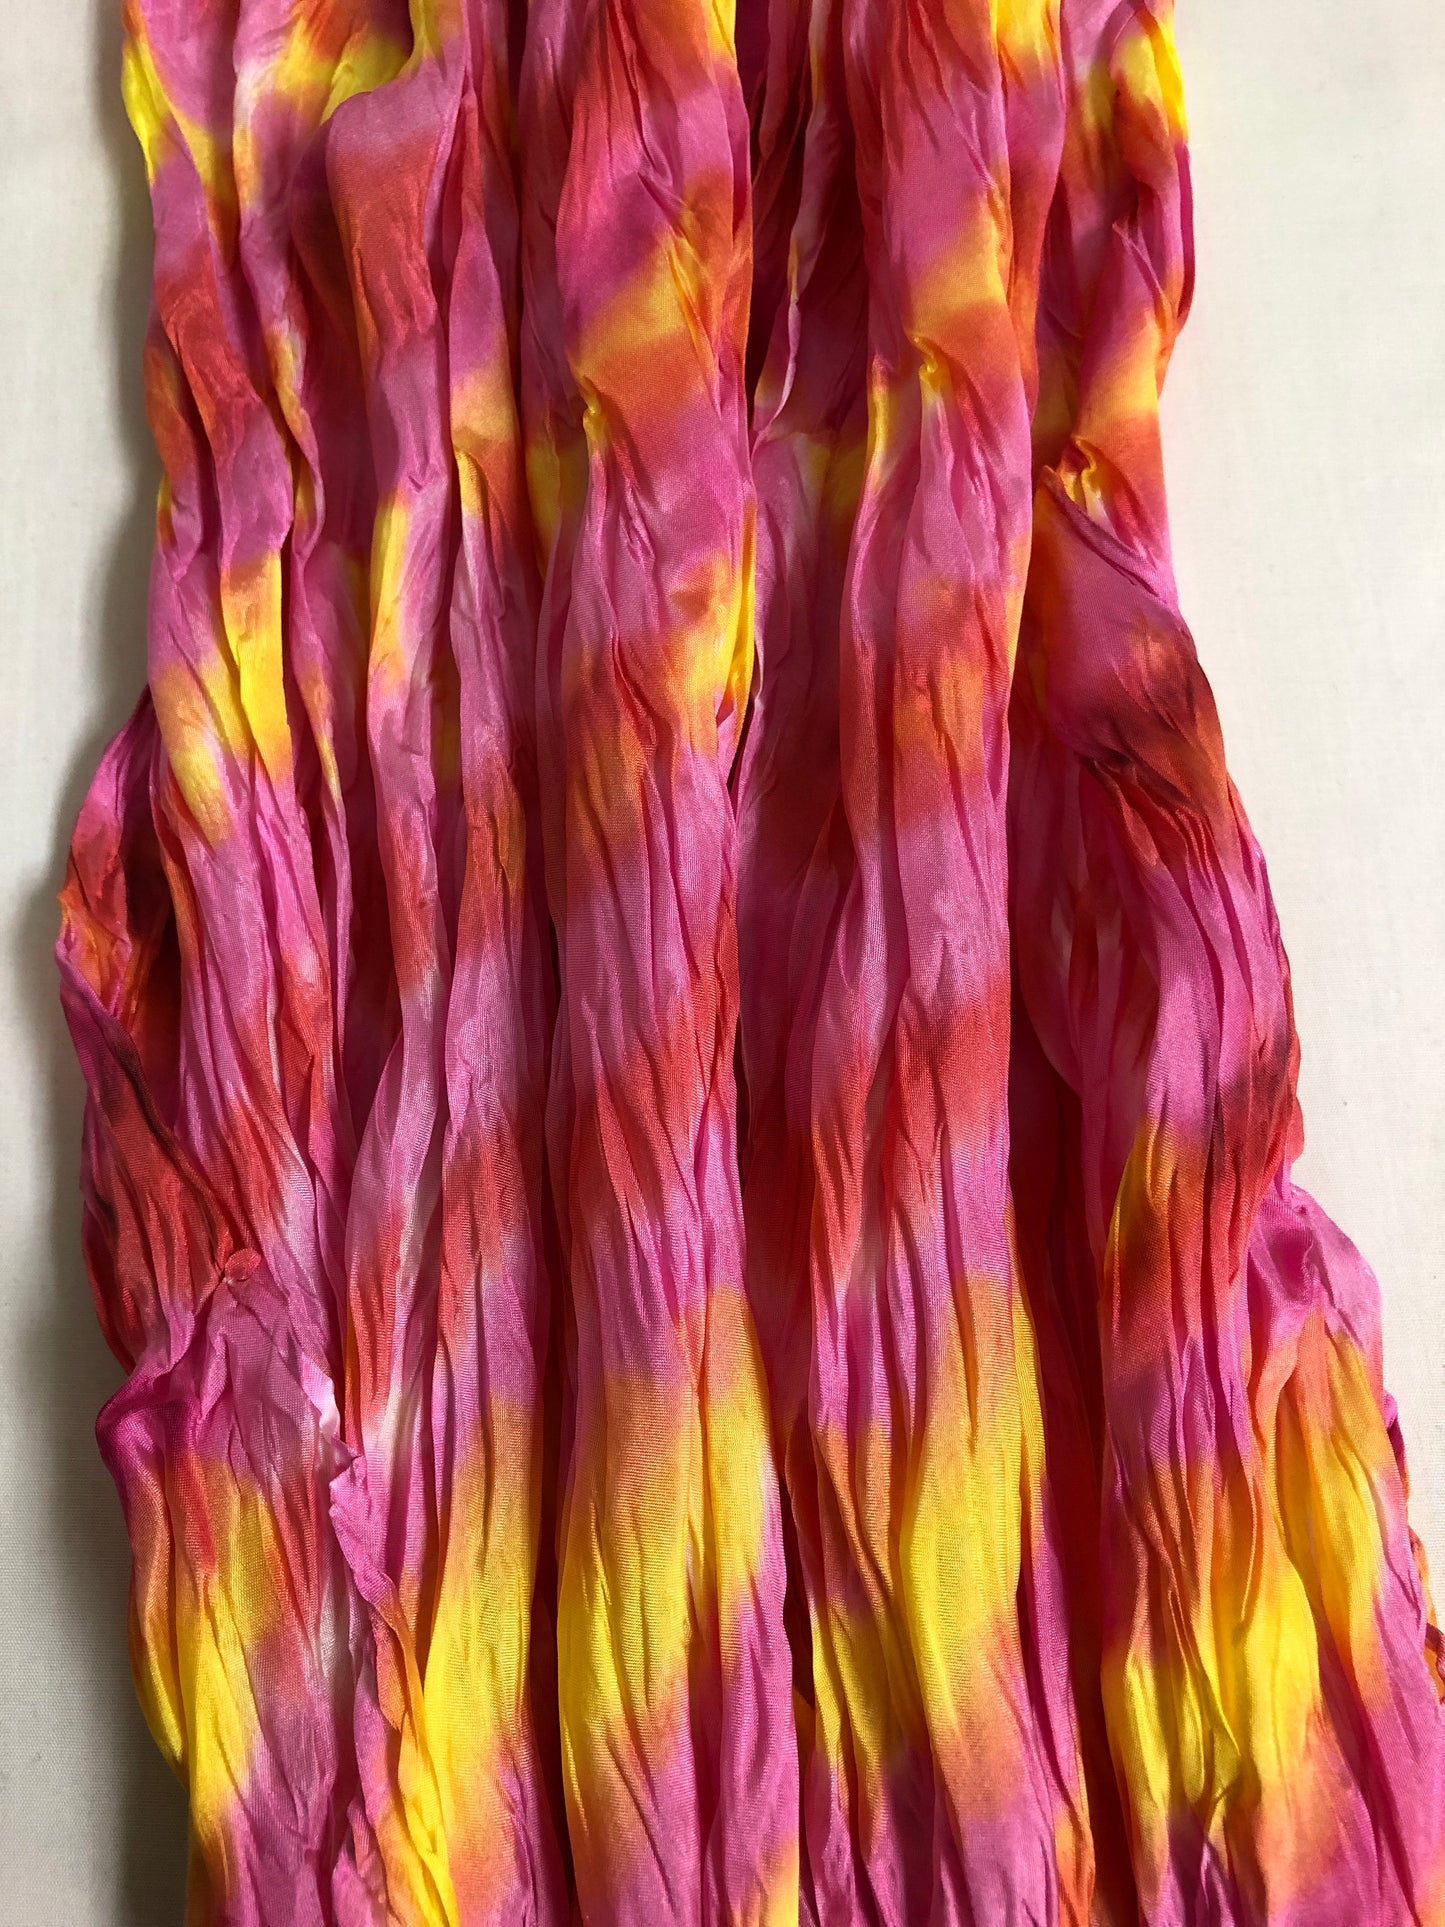 The “Activity Scarf” - hand-dyed silk scarf - $110